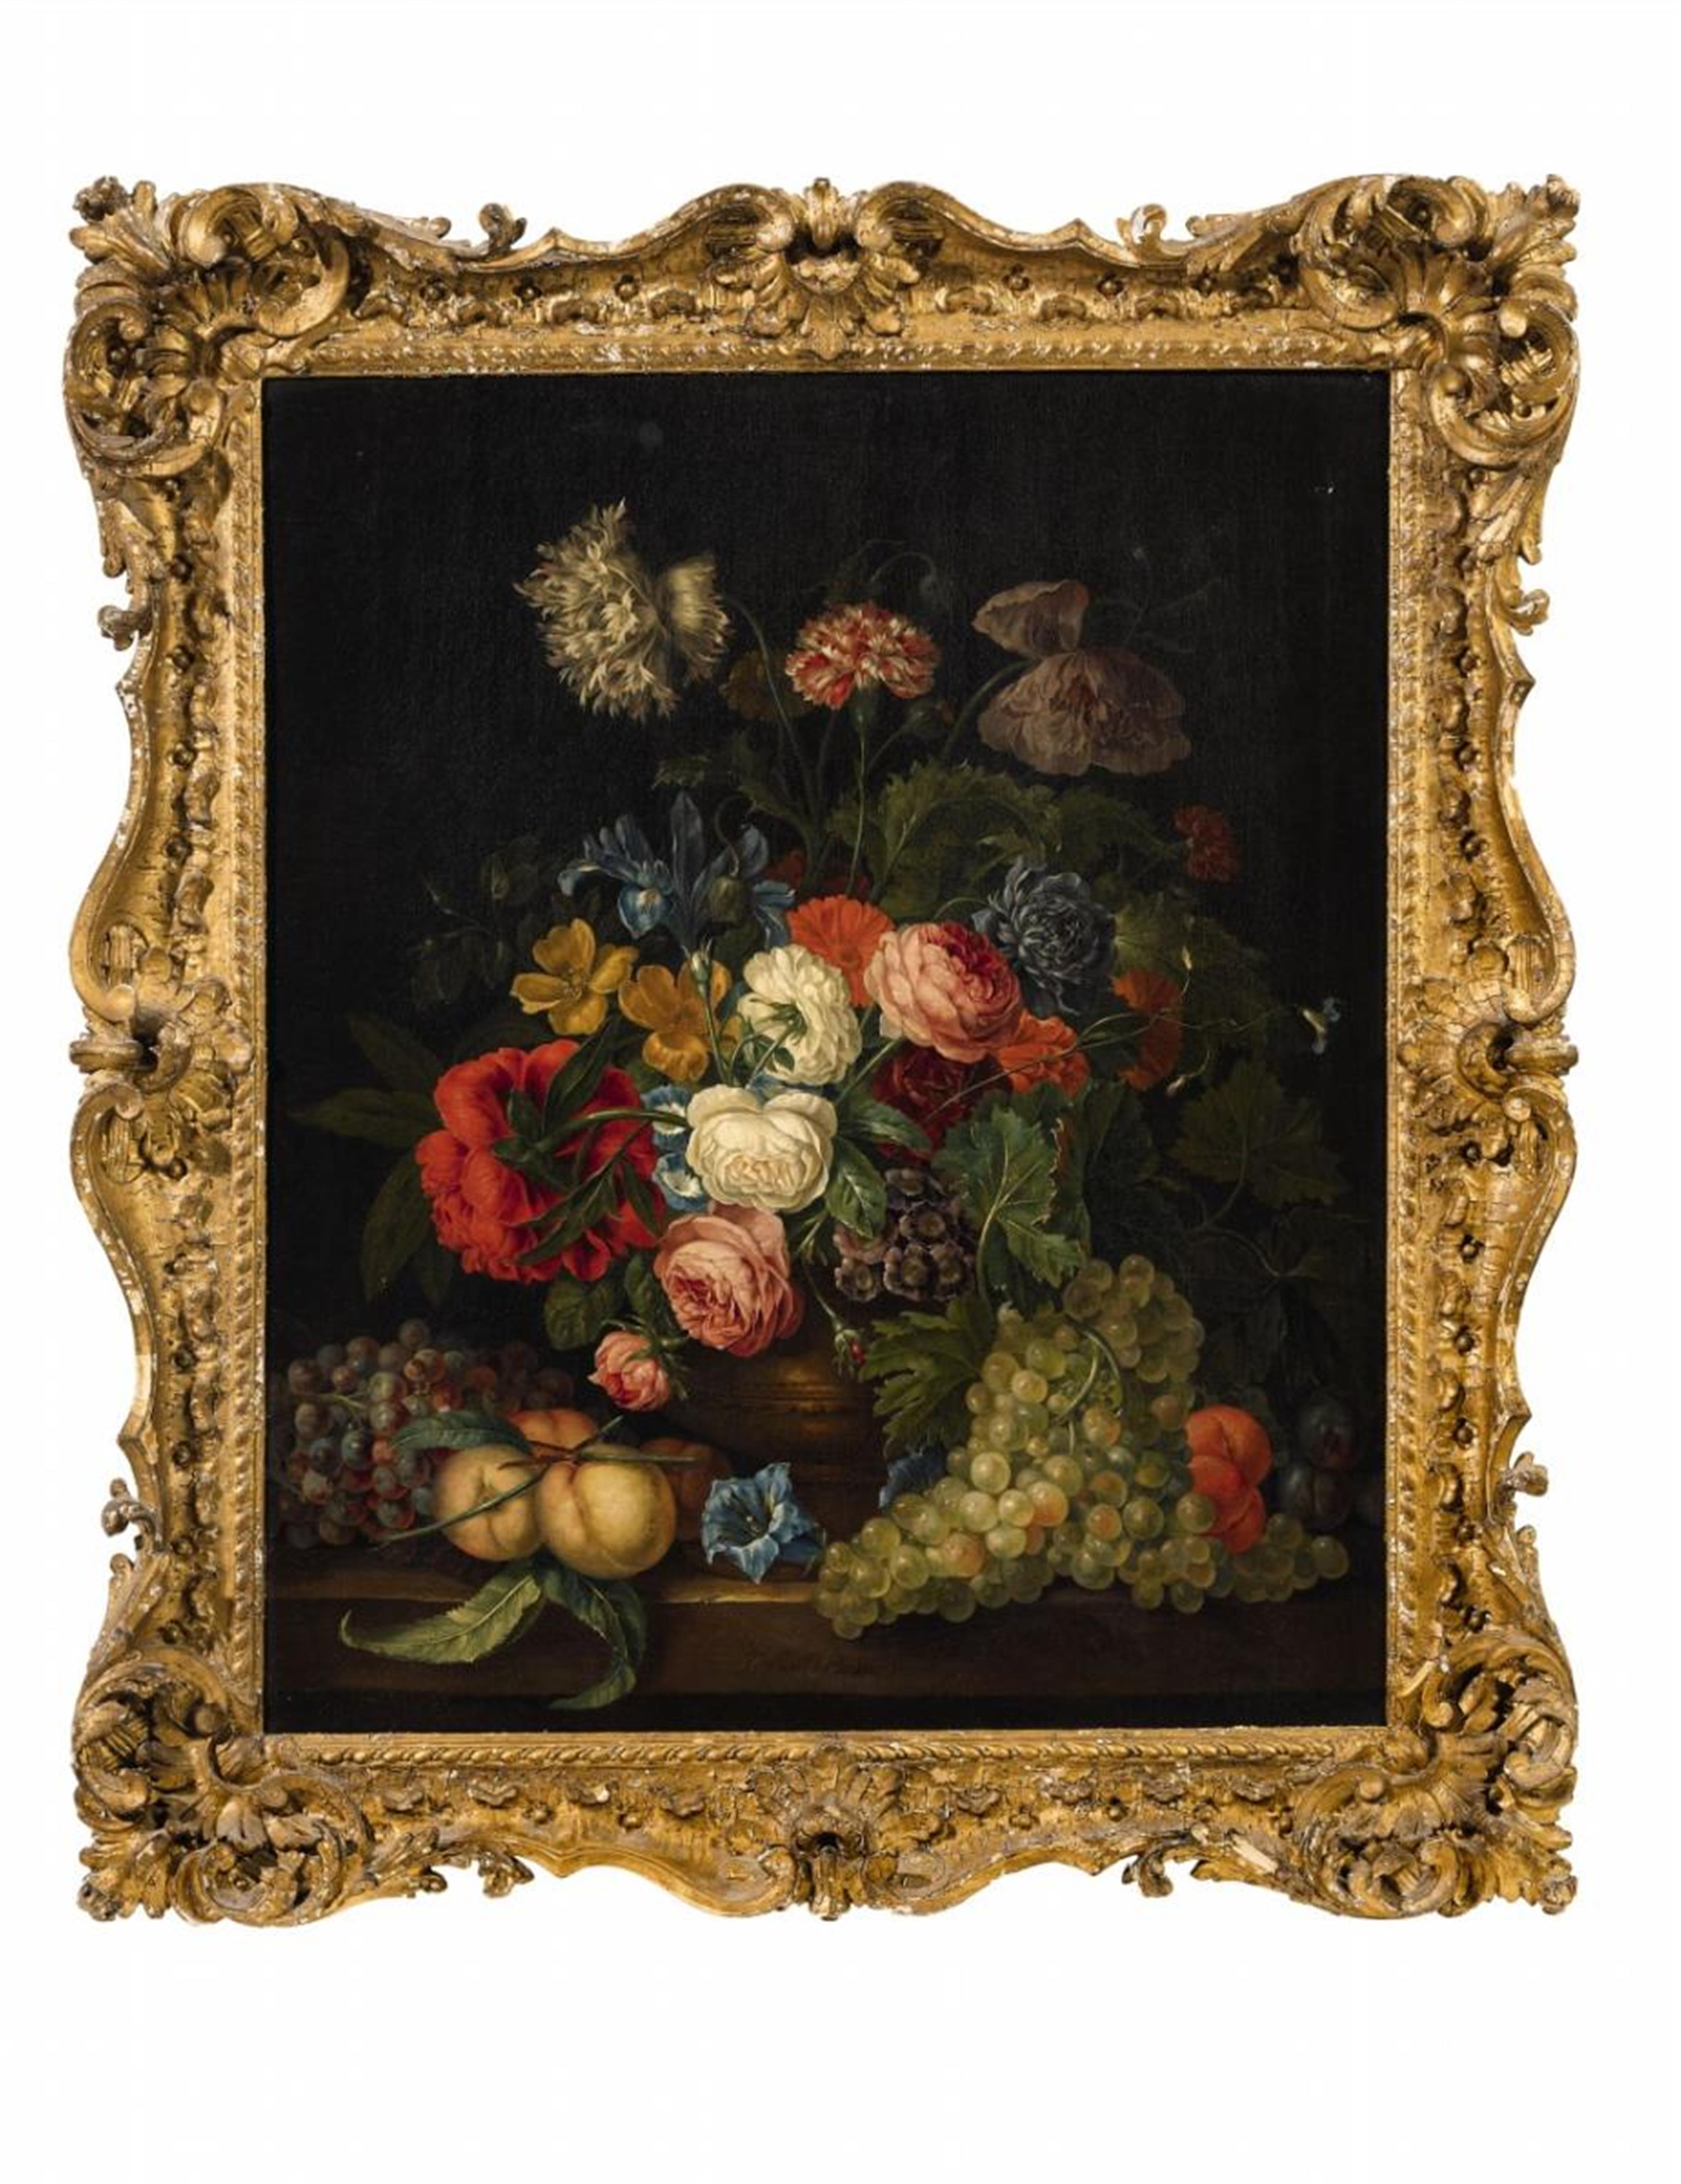 Jacob van Huysum - Still Life with a Vase of Flowers and Fruits - image-1